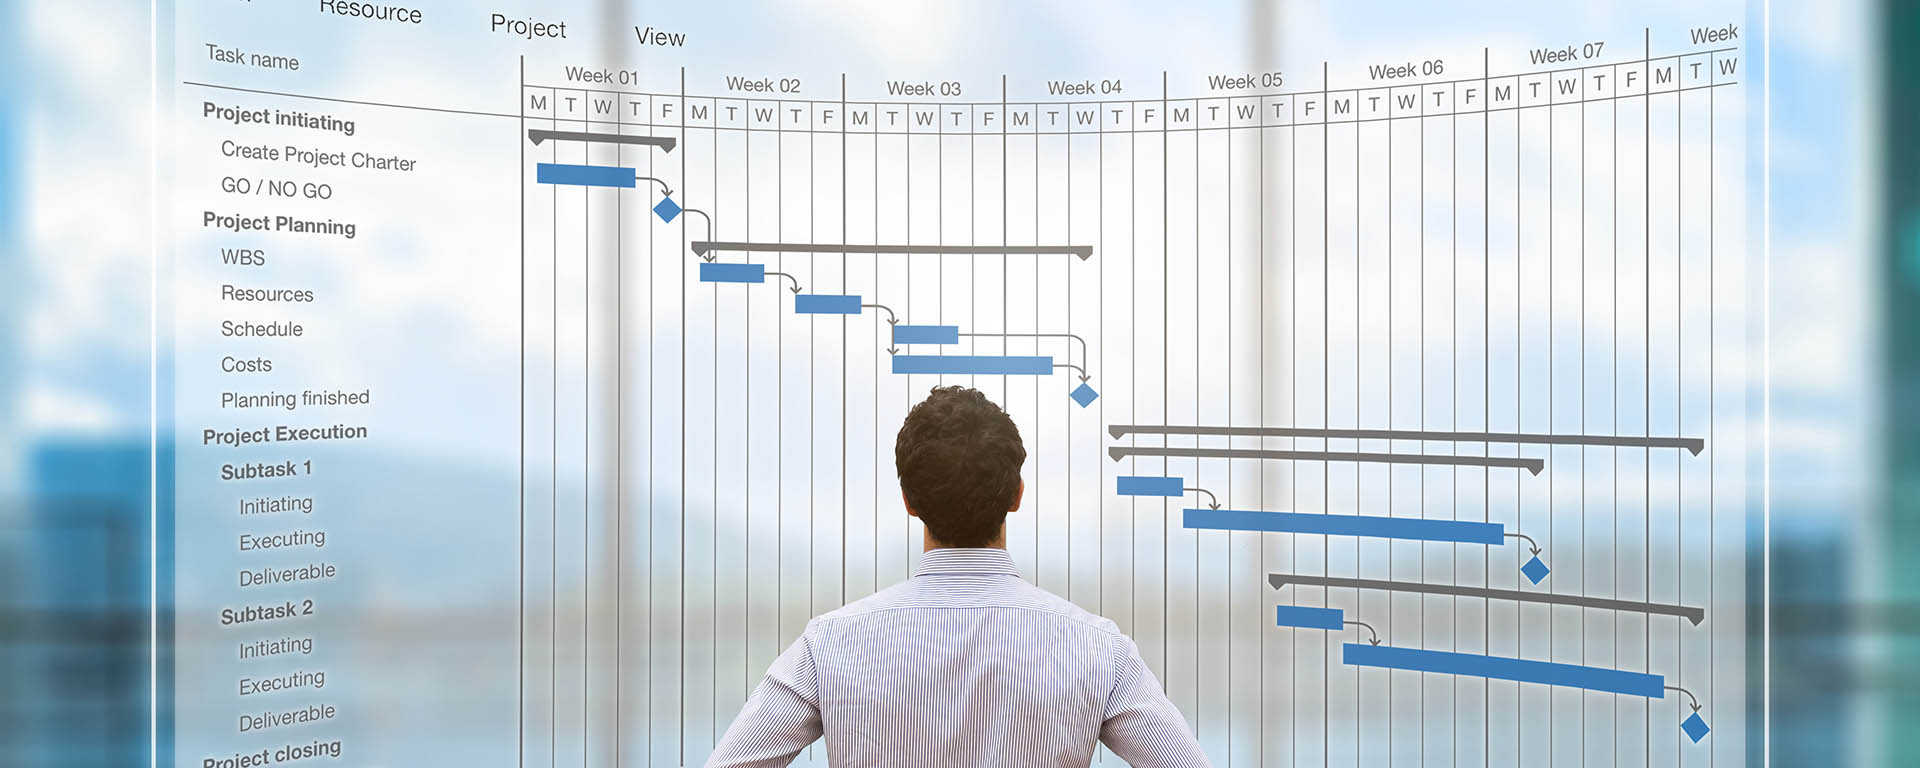 A man stands, back to the camera, facing a larger than life wall sized project management chart spanning 8 weeks with tasks listed.